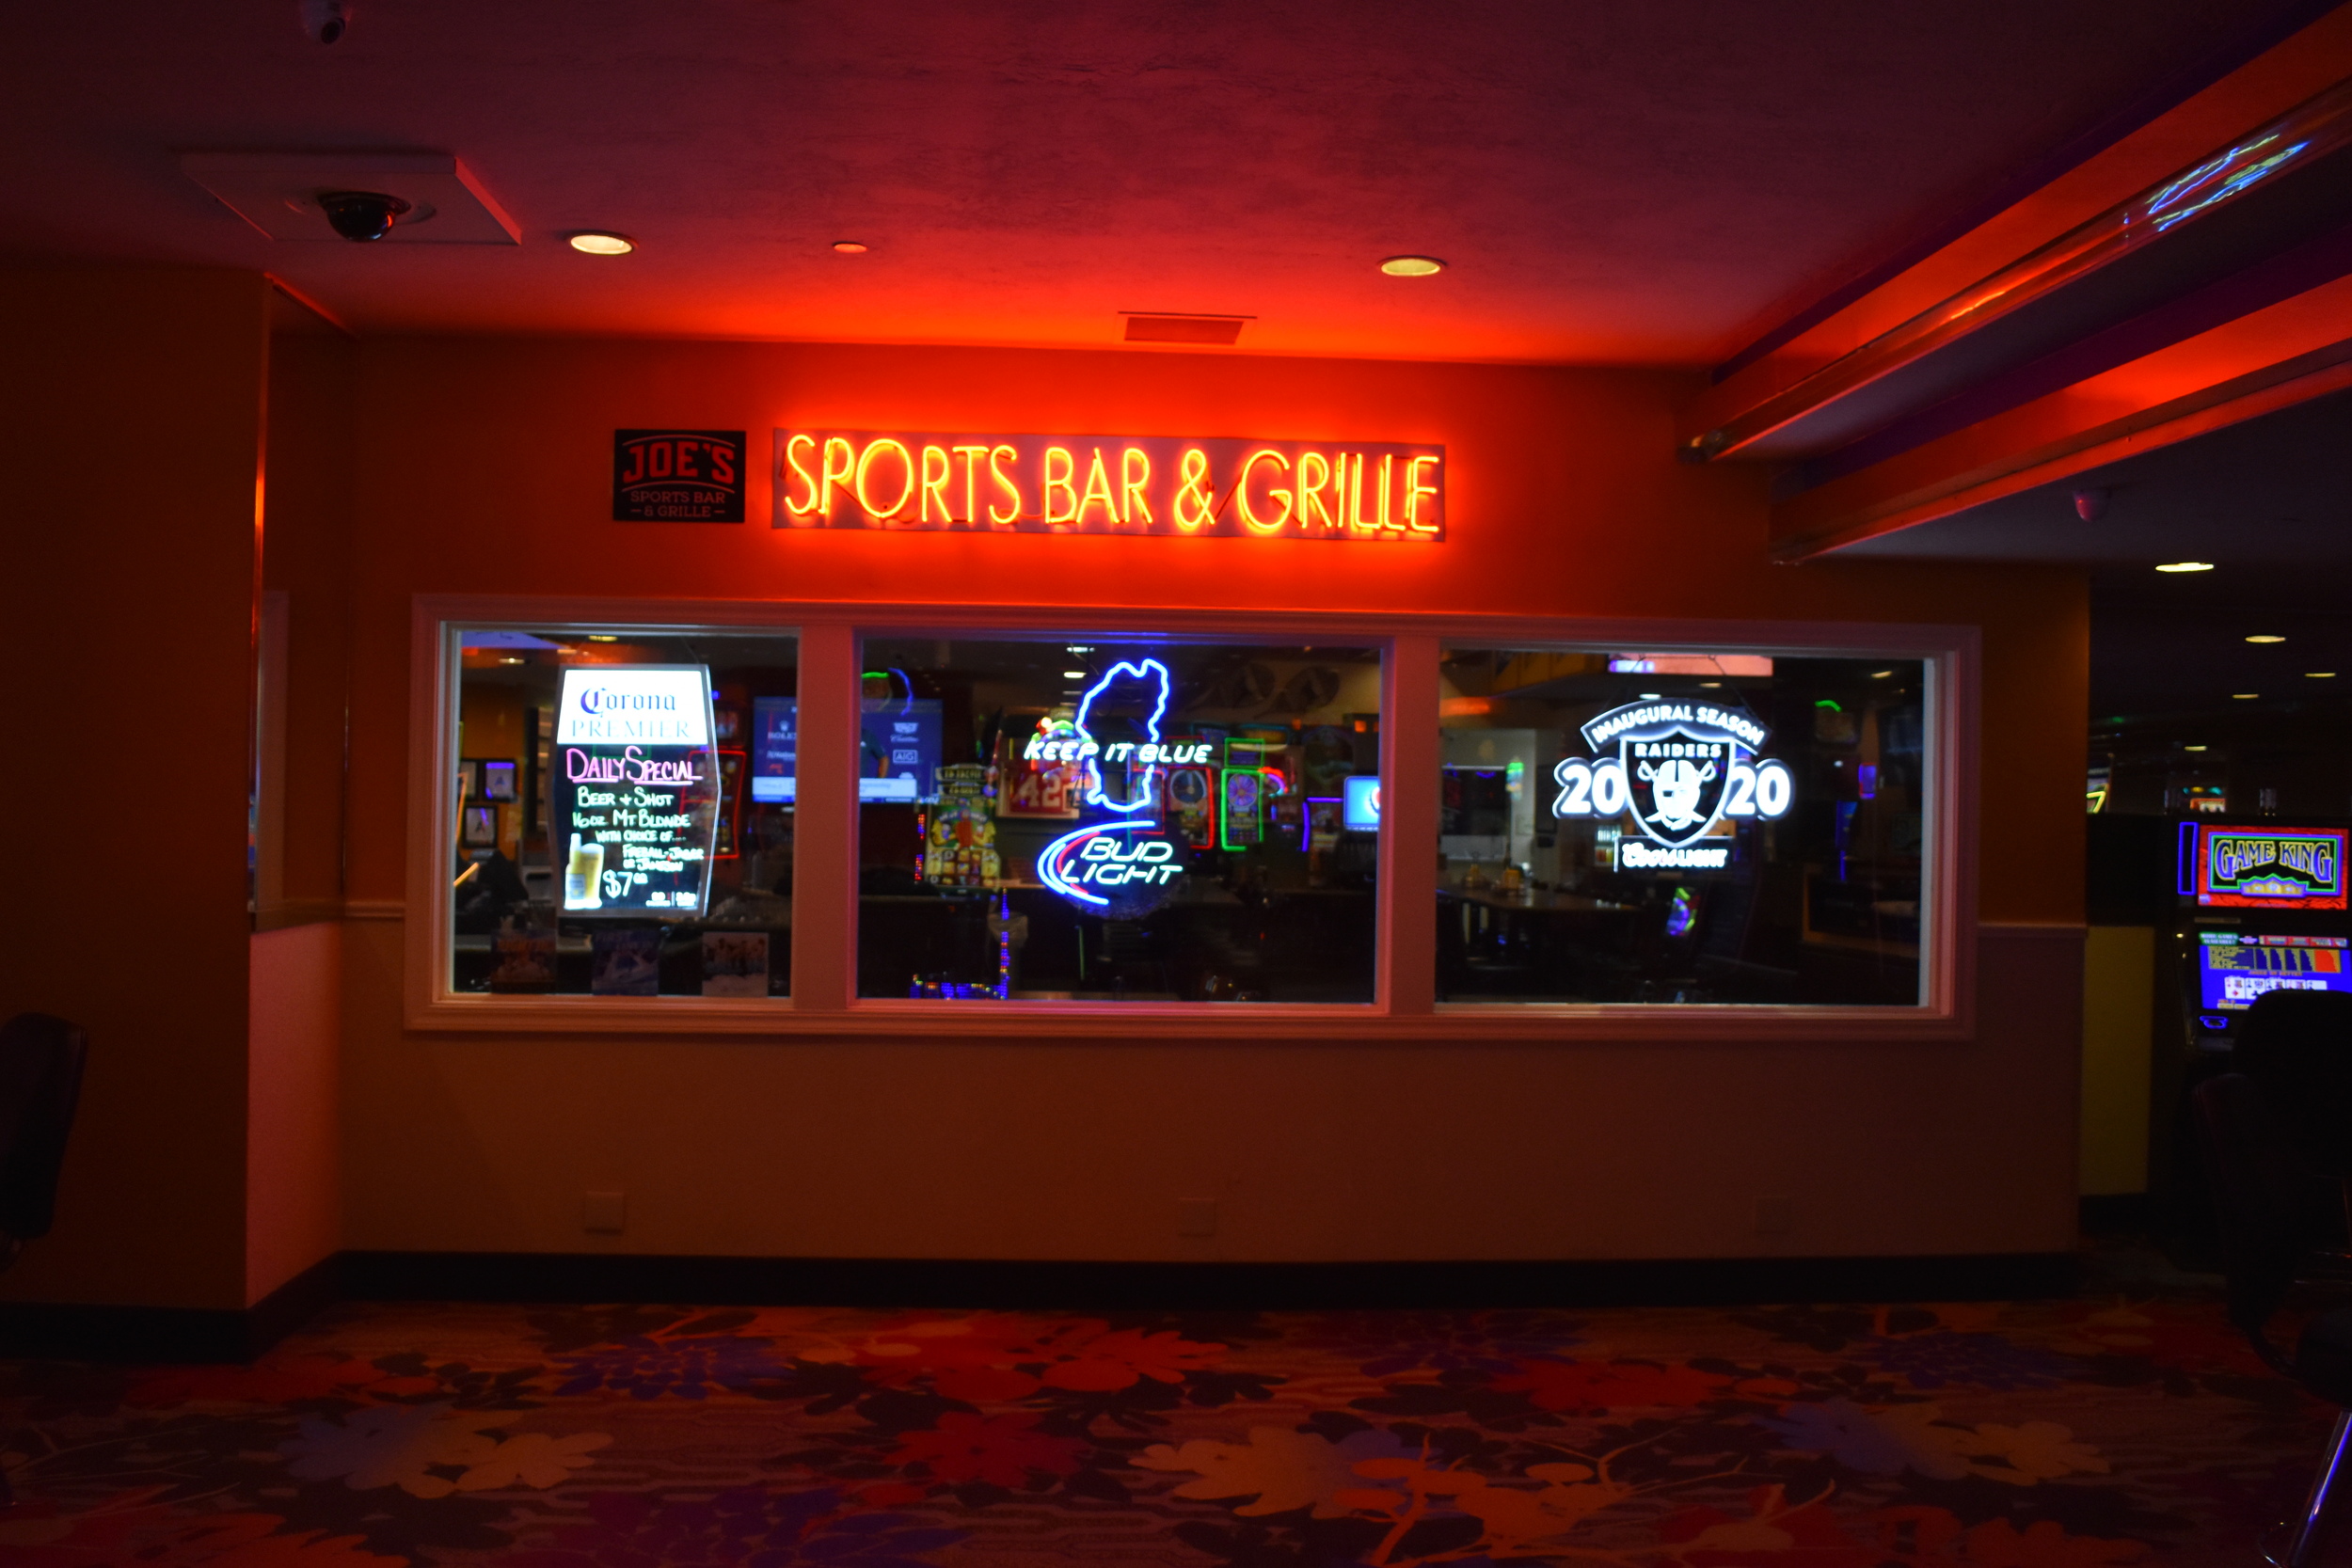 Joe's Sports Bar & Grille wall mounted sign, Stateline, Nevada